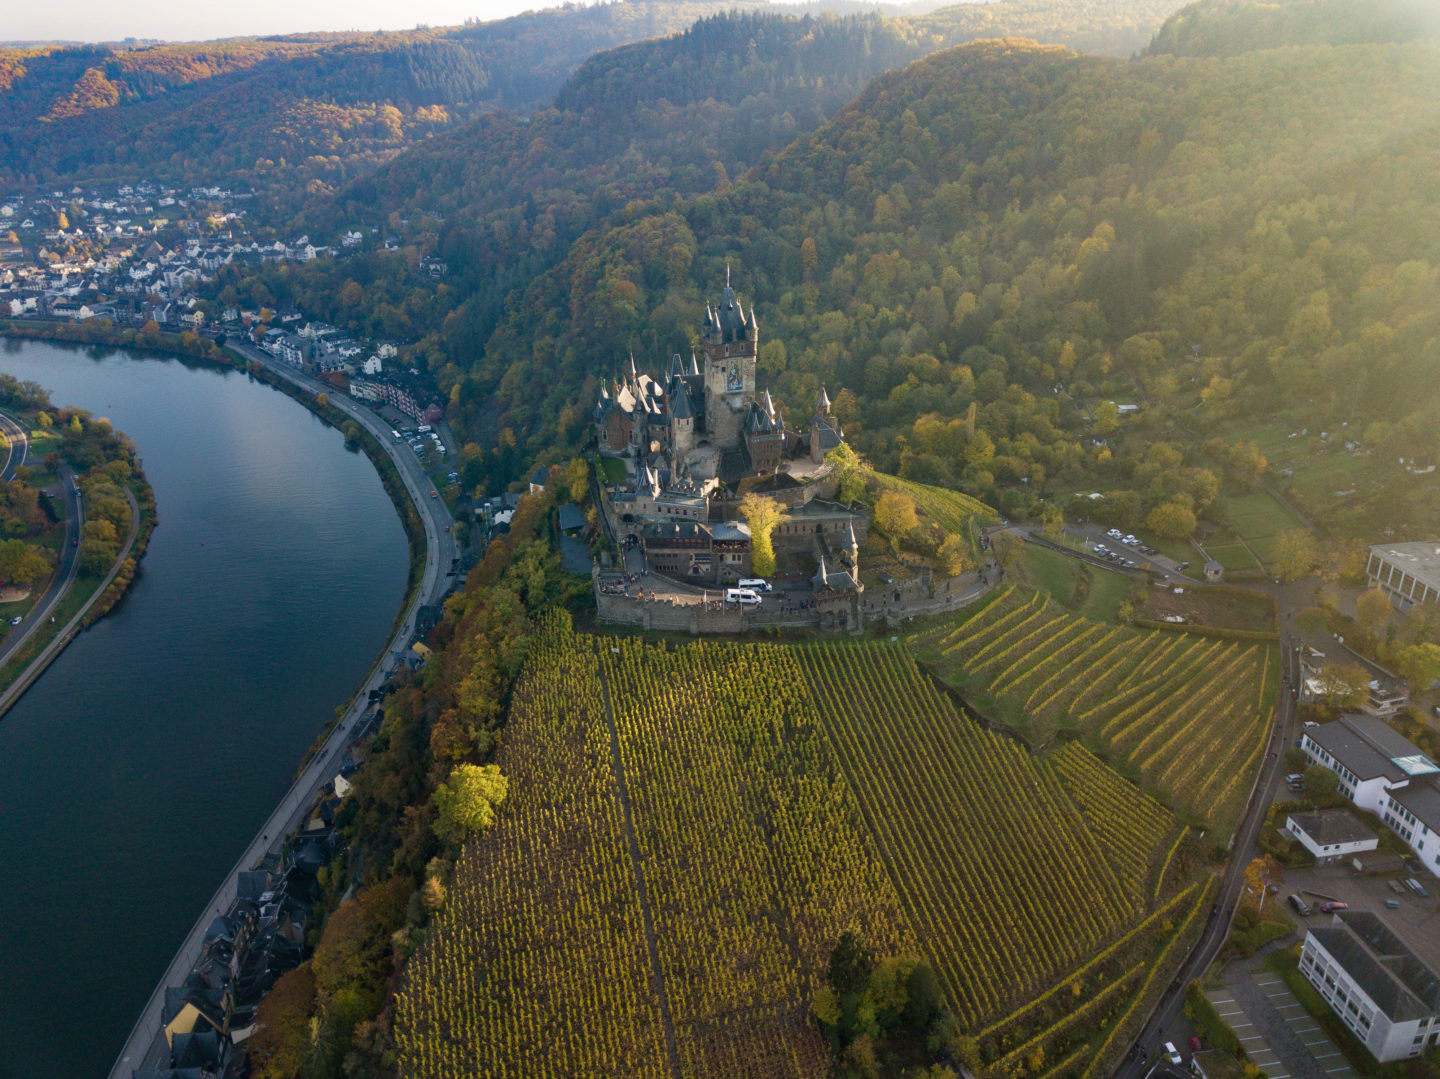 The Cochem Castle above the town